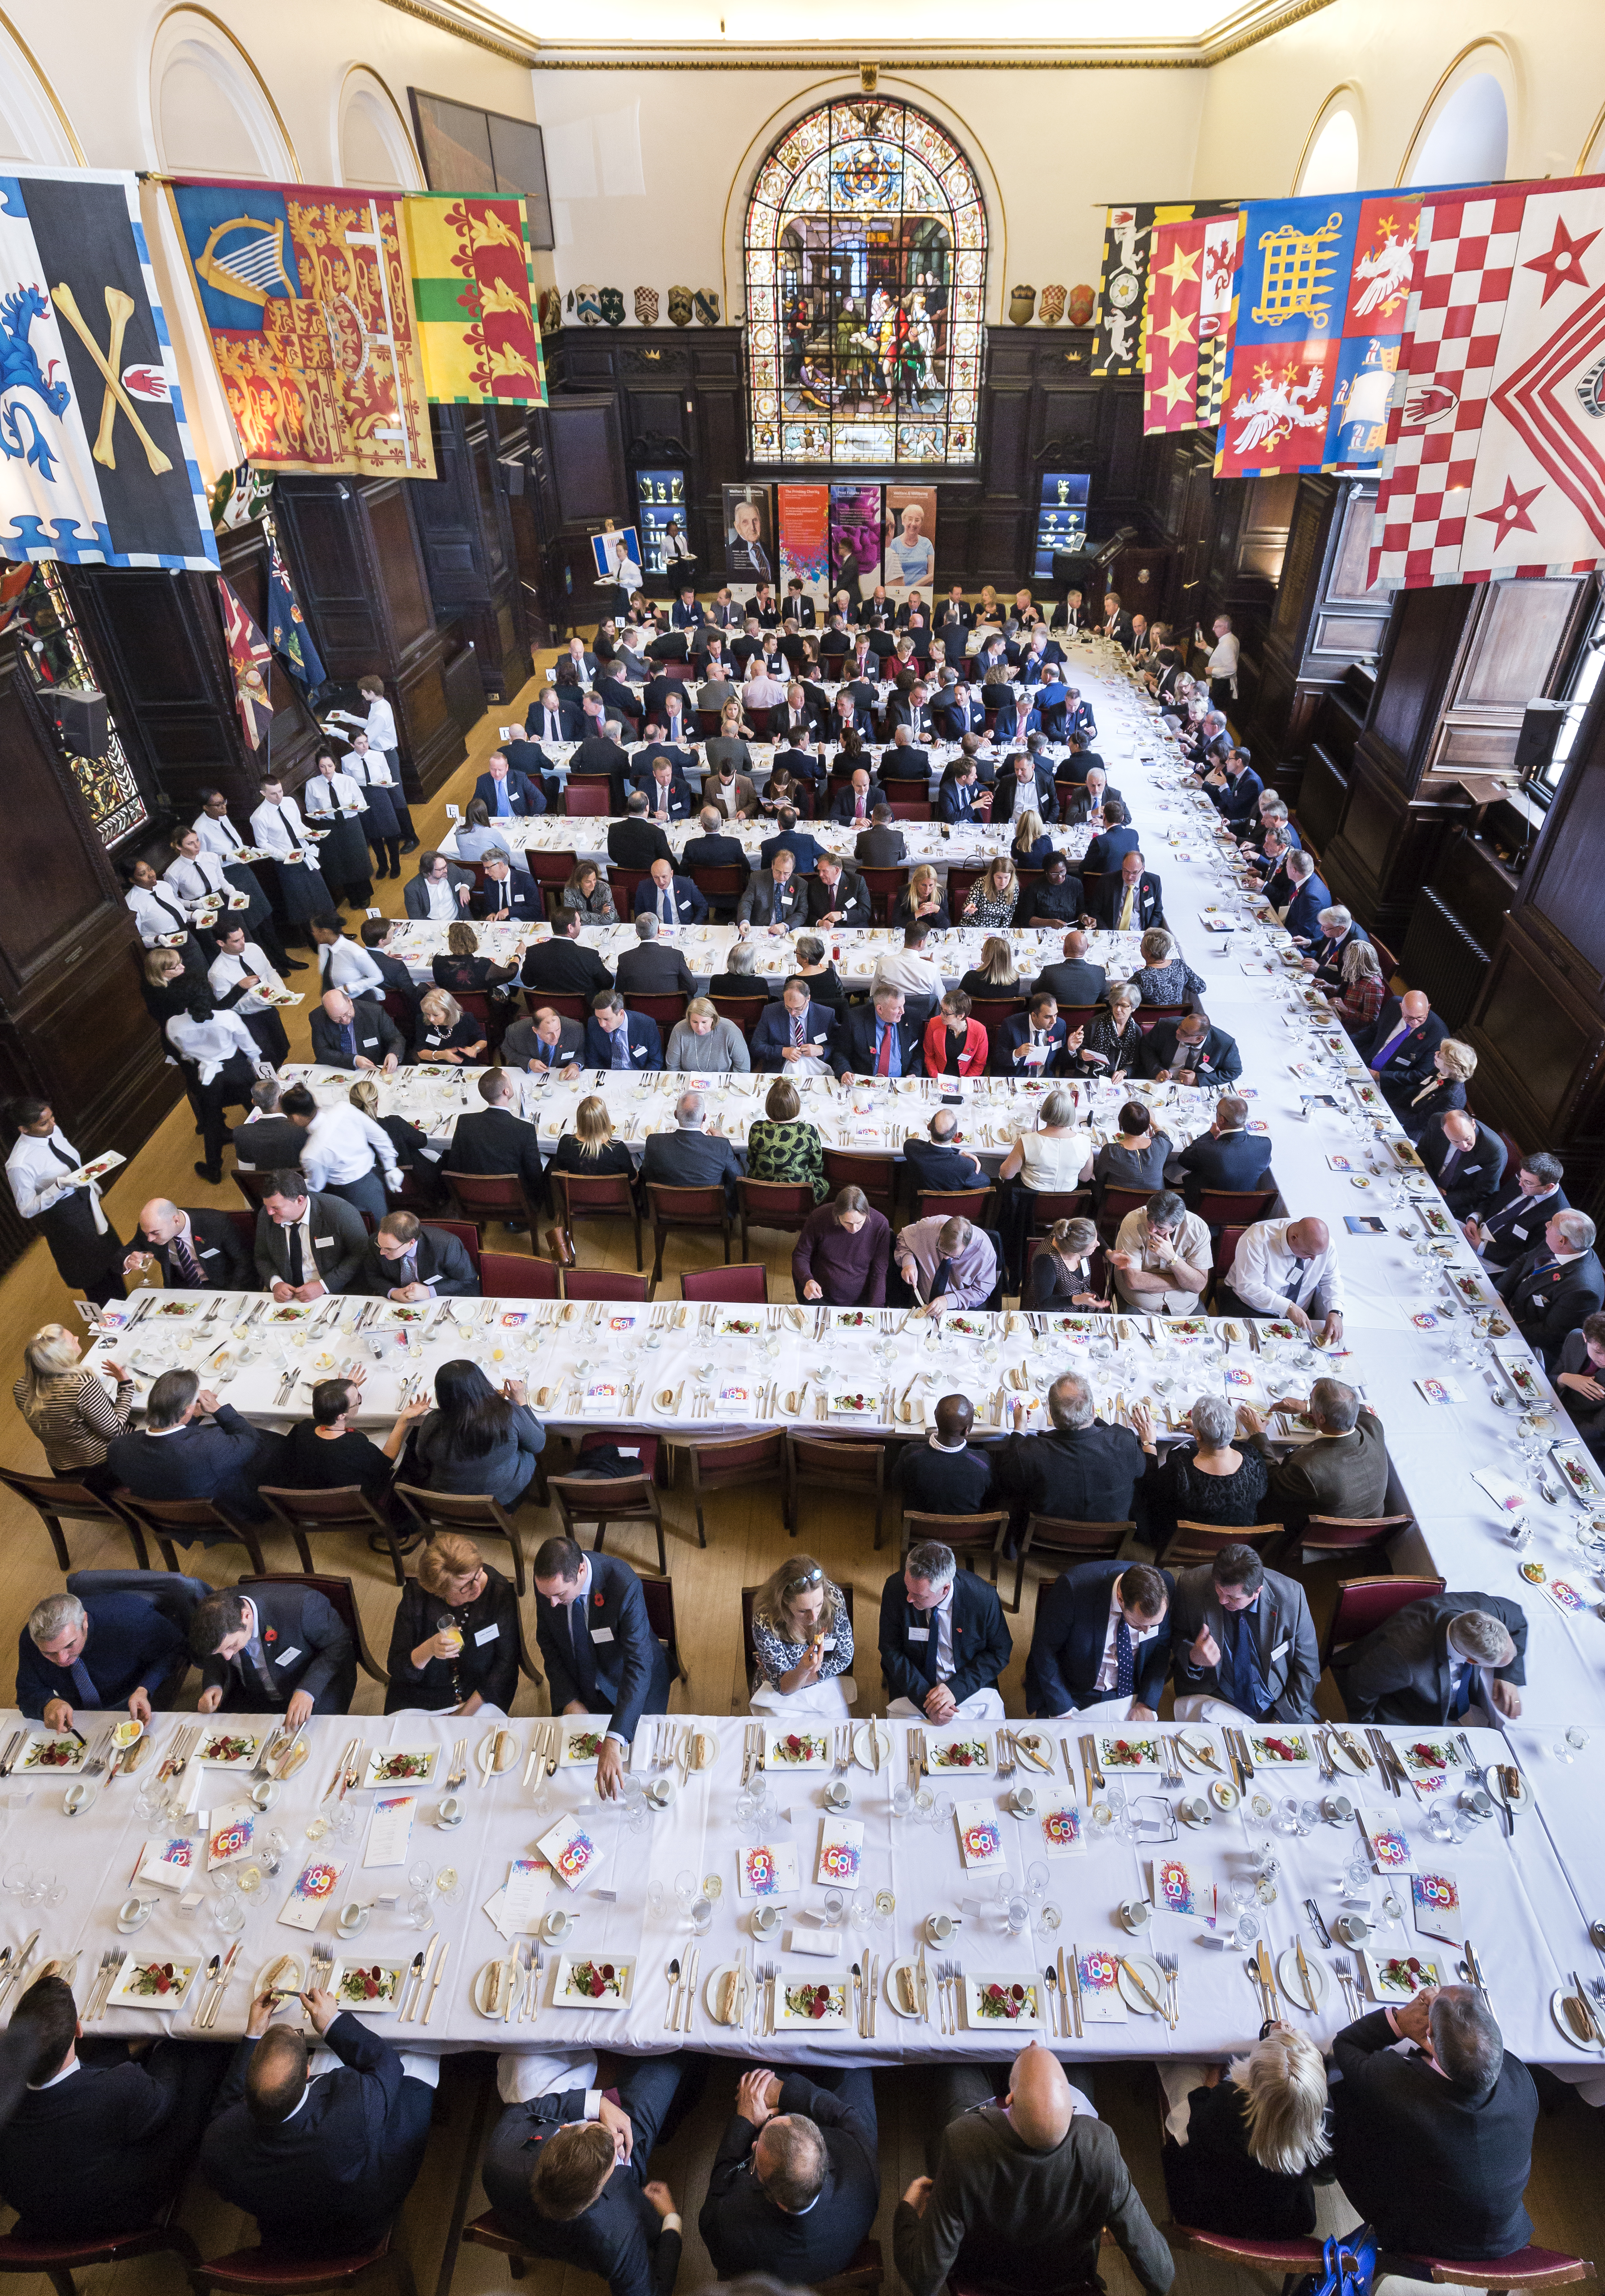 The Printing Charity’s Annual Luncheon